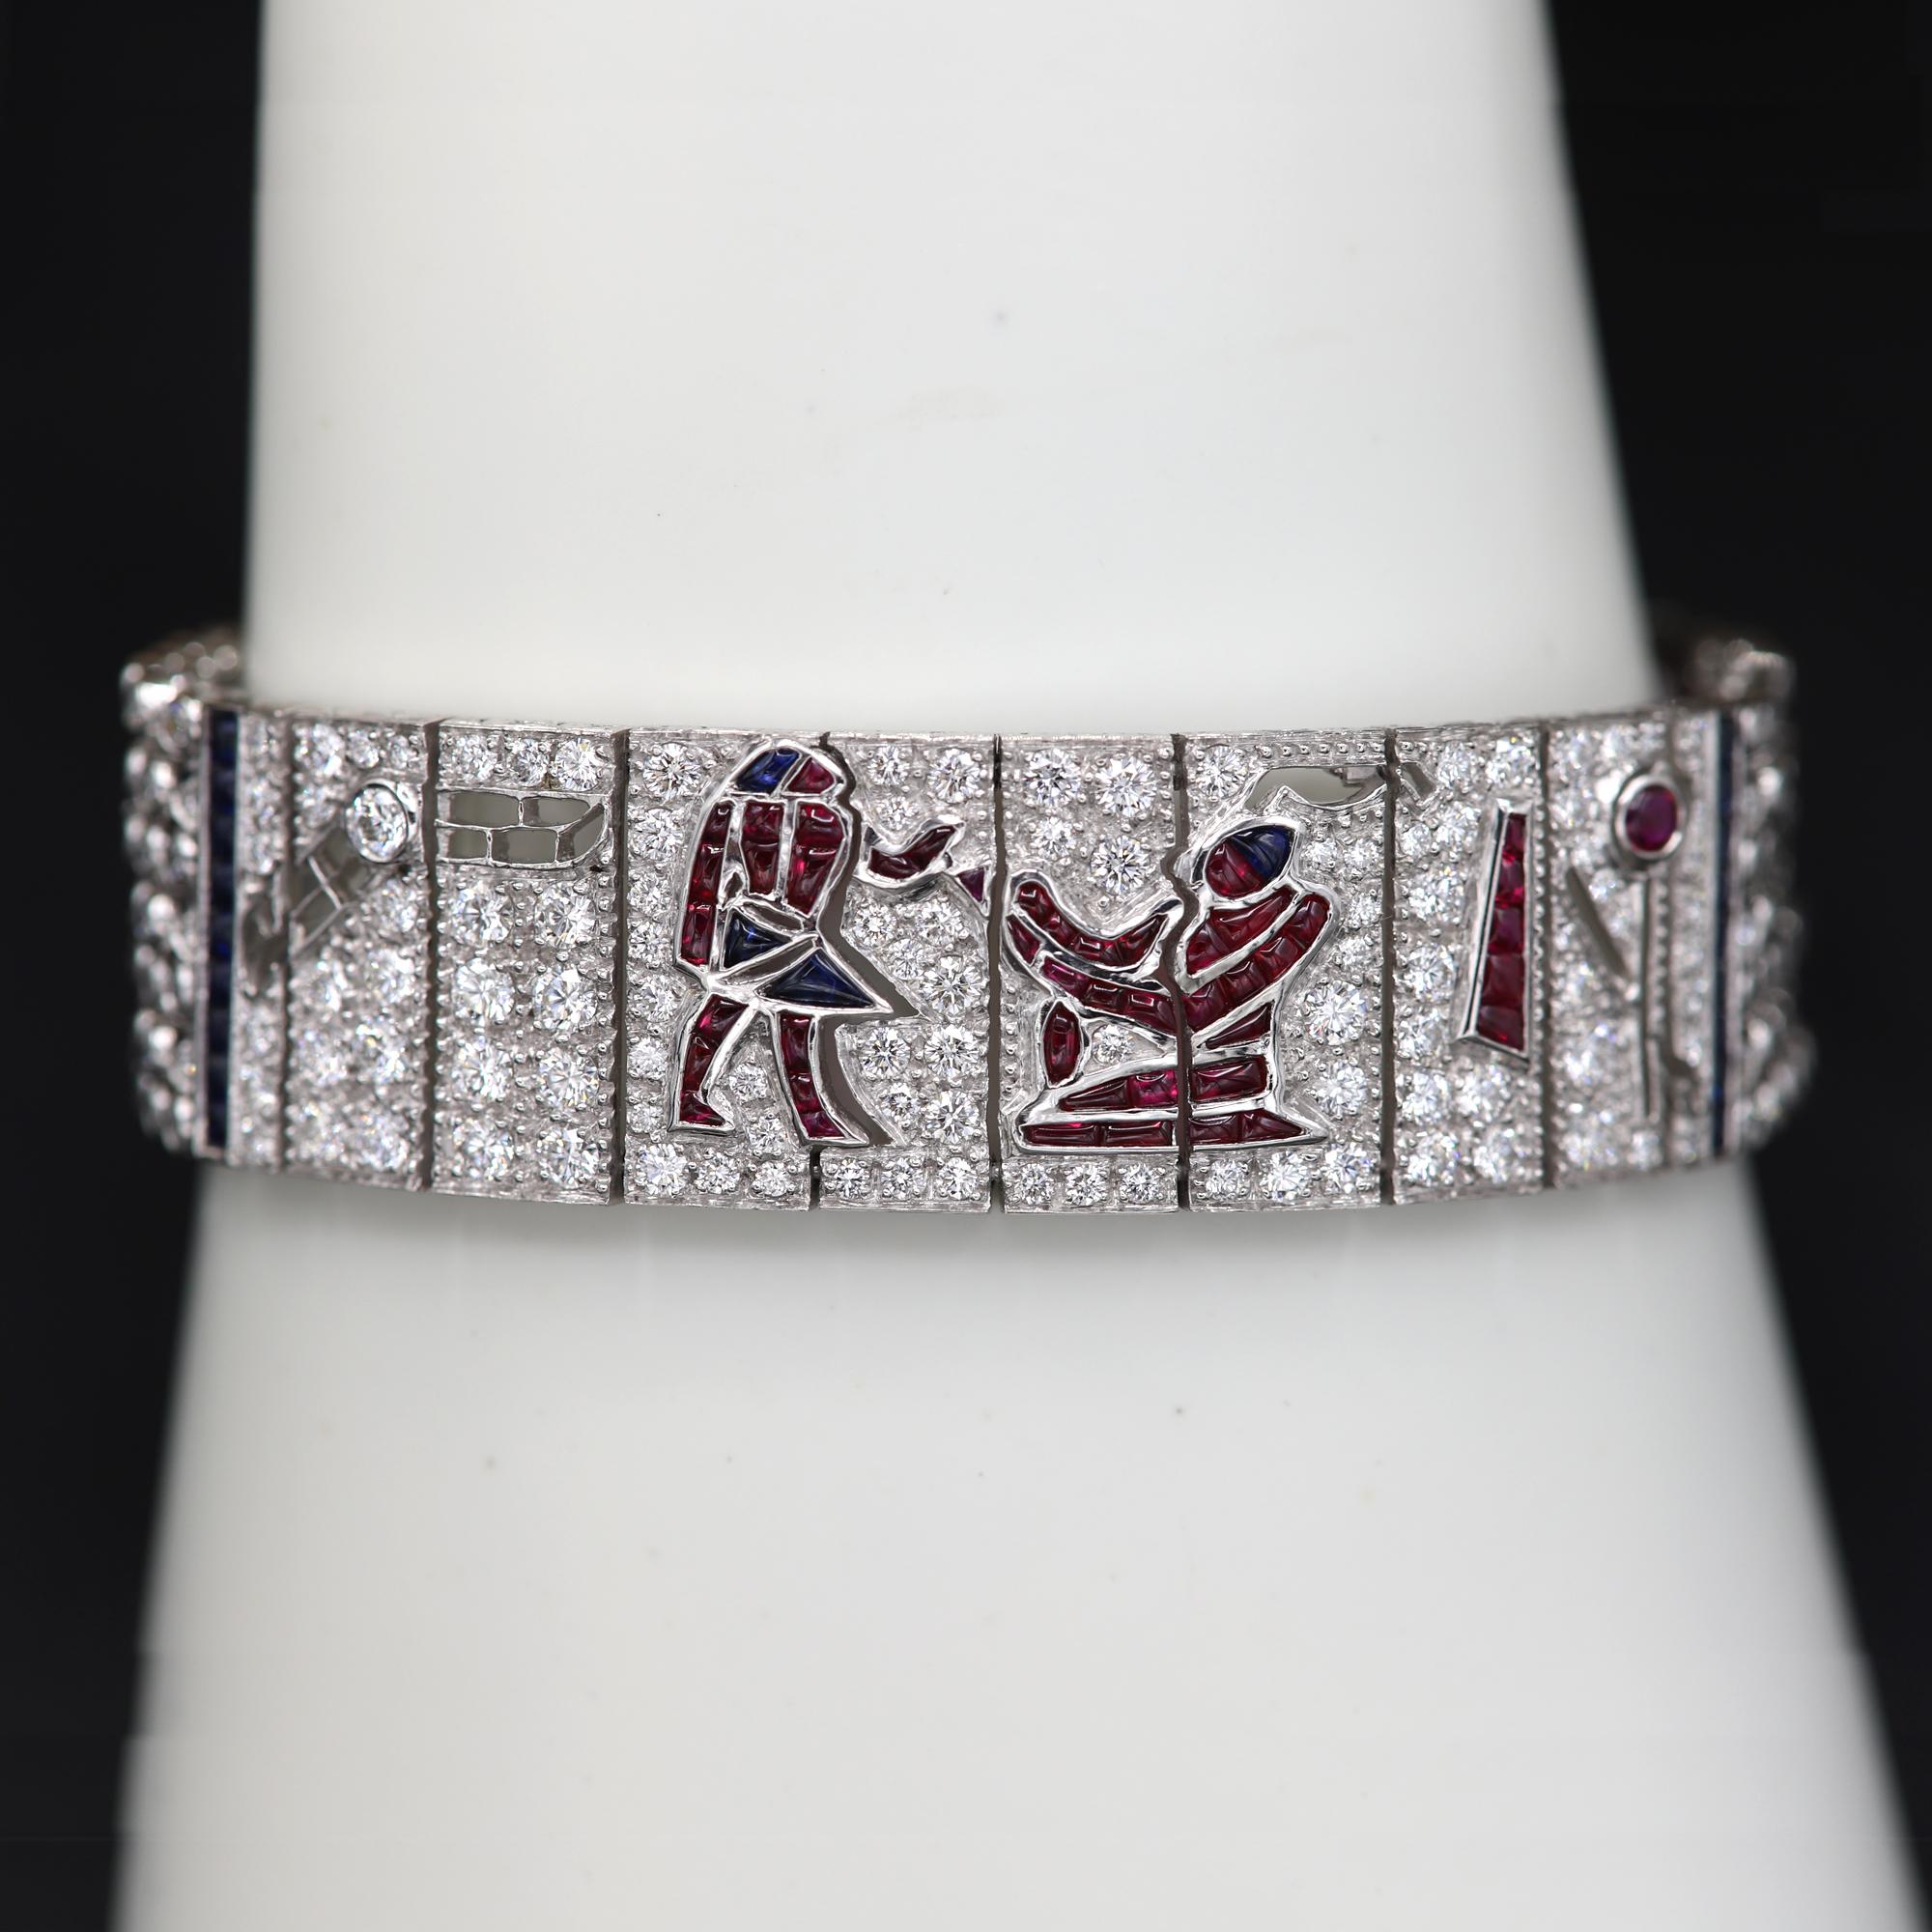 Egyptian Art Replica Bracelet- made from Platinum.
Diamonds, Blue Sapphire, Ruby & Emerald.
Total Diamonds 8.10 carat G-VS
Total color gemstones 9.07 carat.
Weight of bracelet is 64 grams
New, however was made over 20 years ago and was put away in a